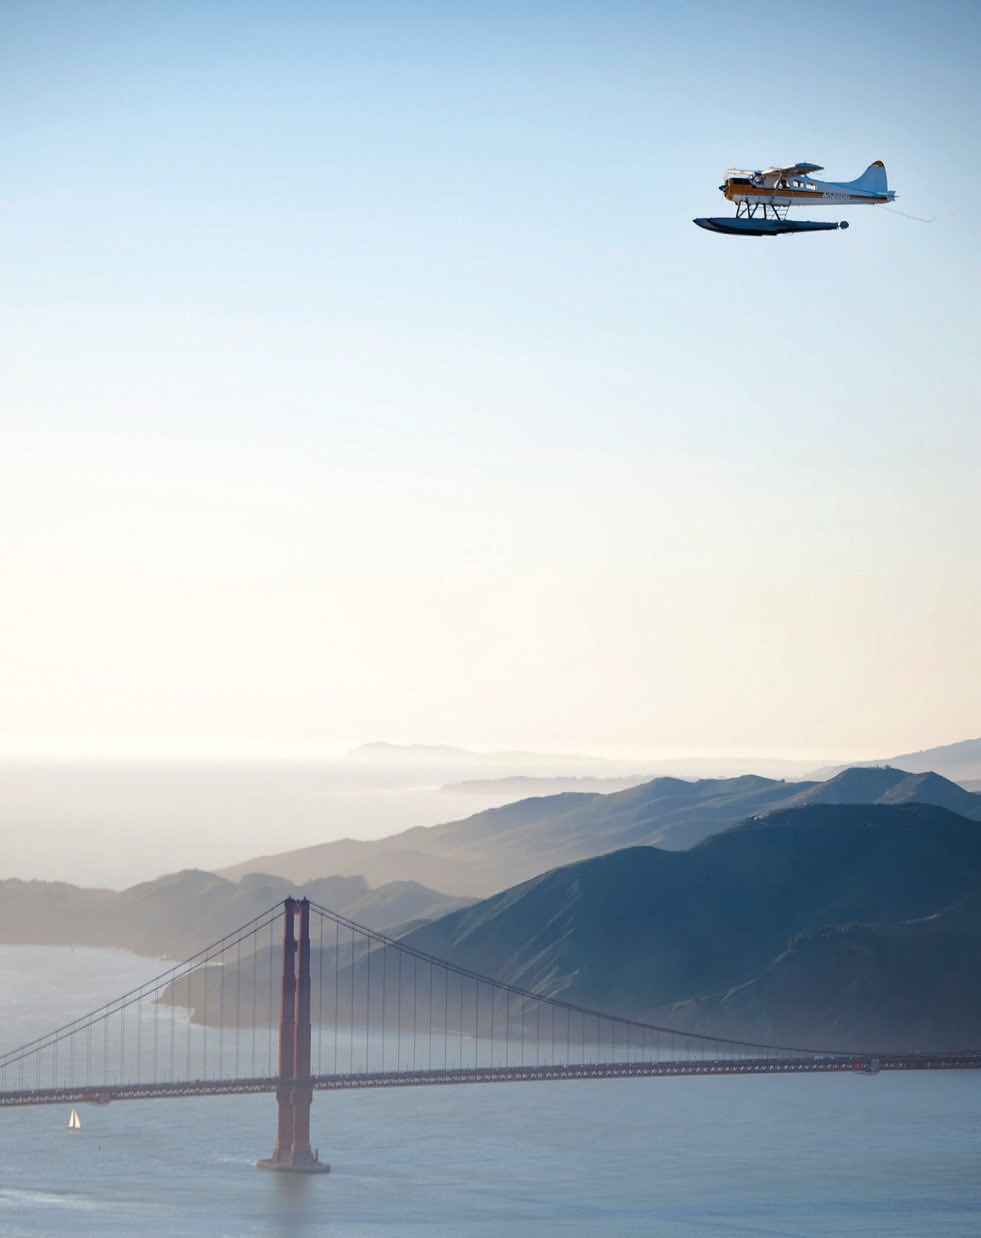 Seaplane Adventures offers an unforgettable journey. COURTESY OF NAPA VALLEY WINE TRAIN